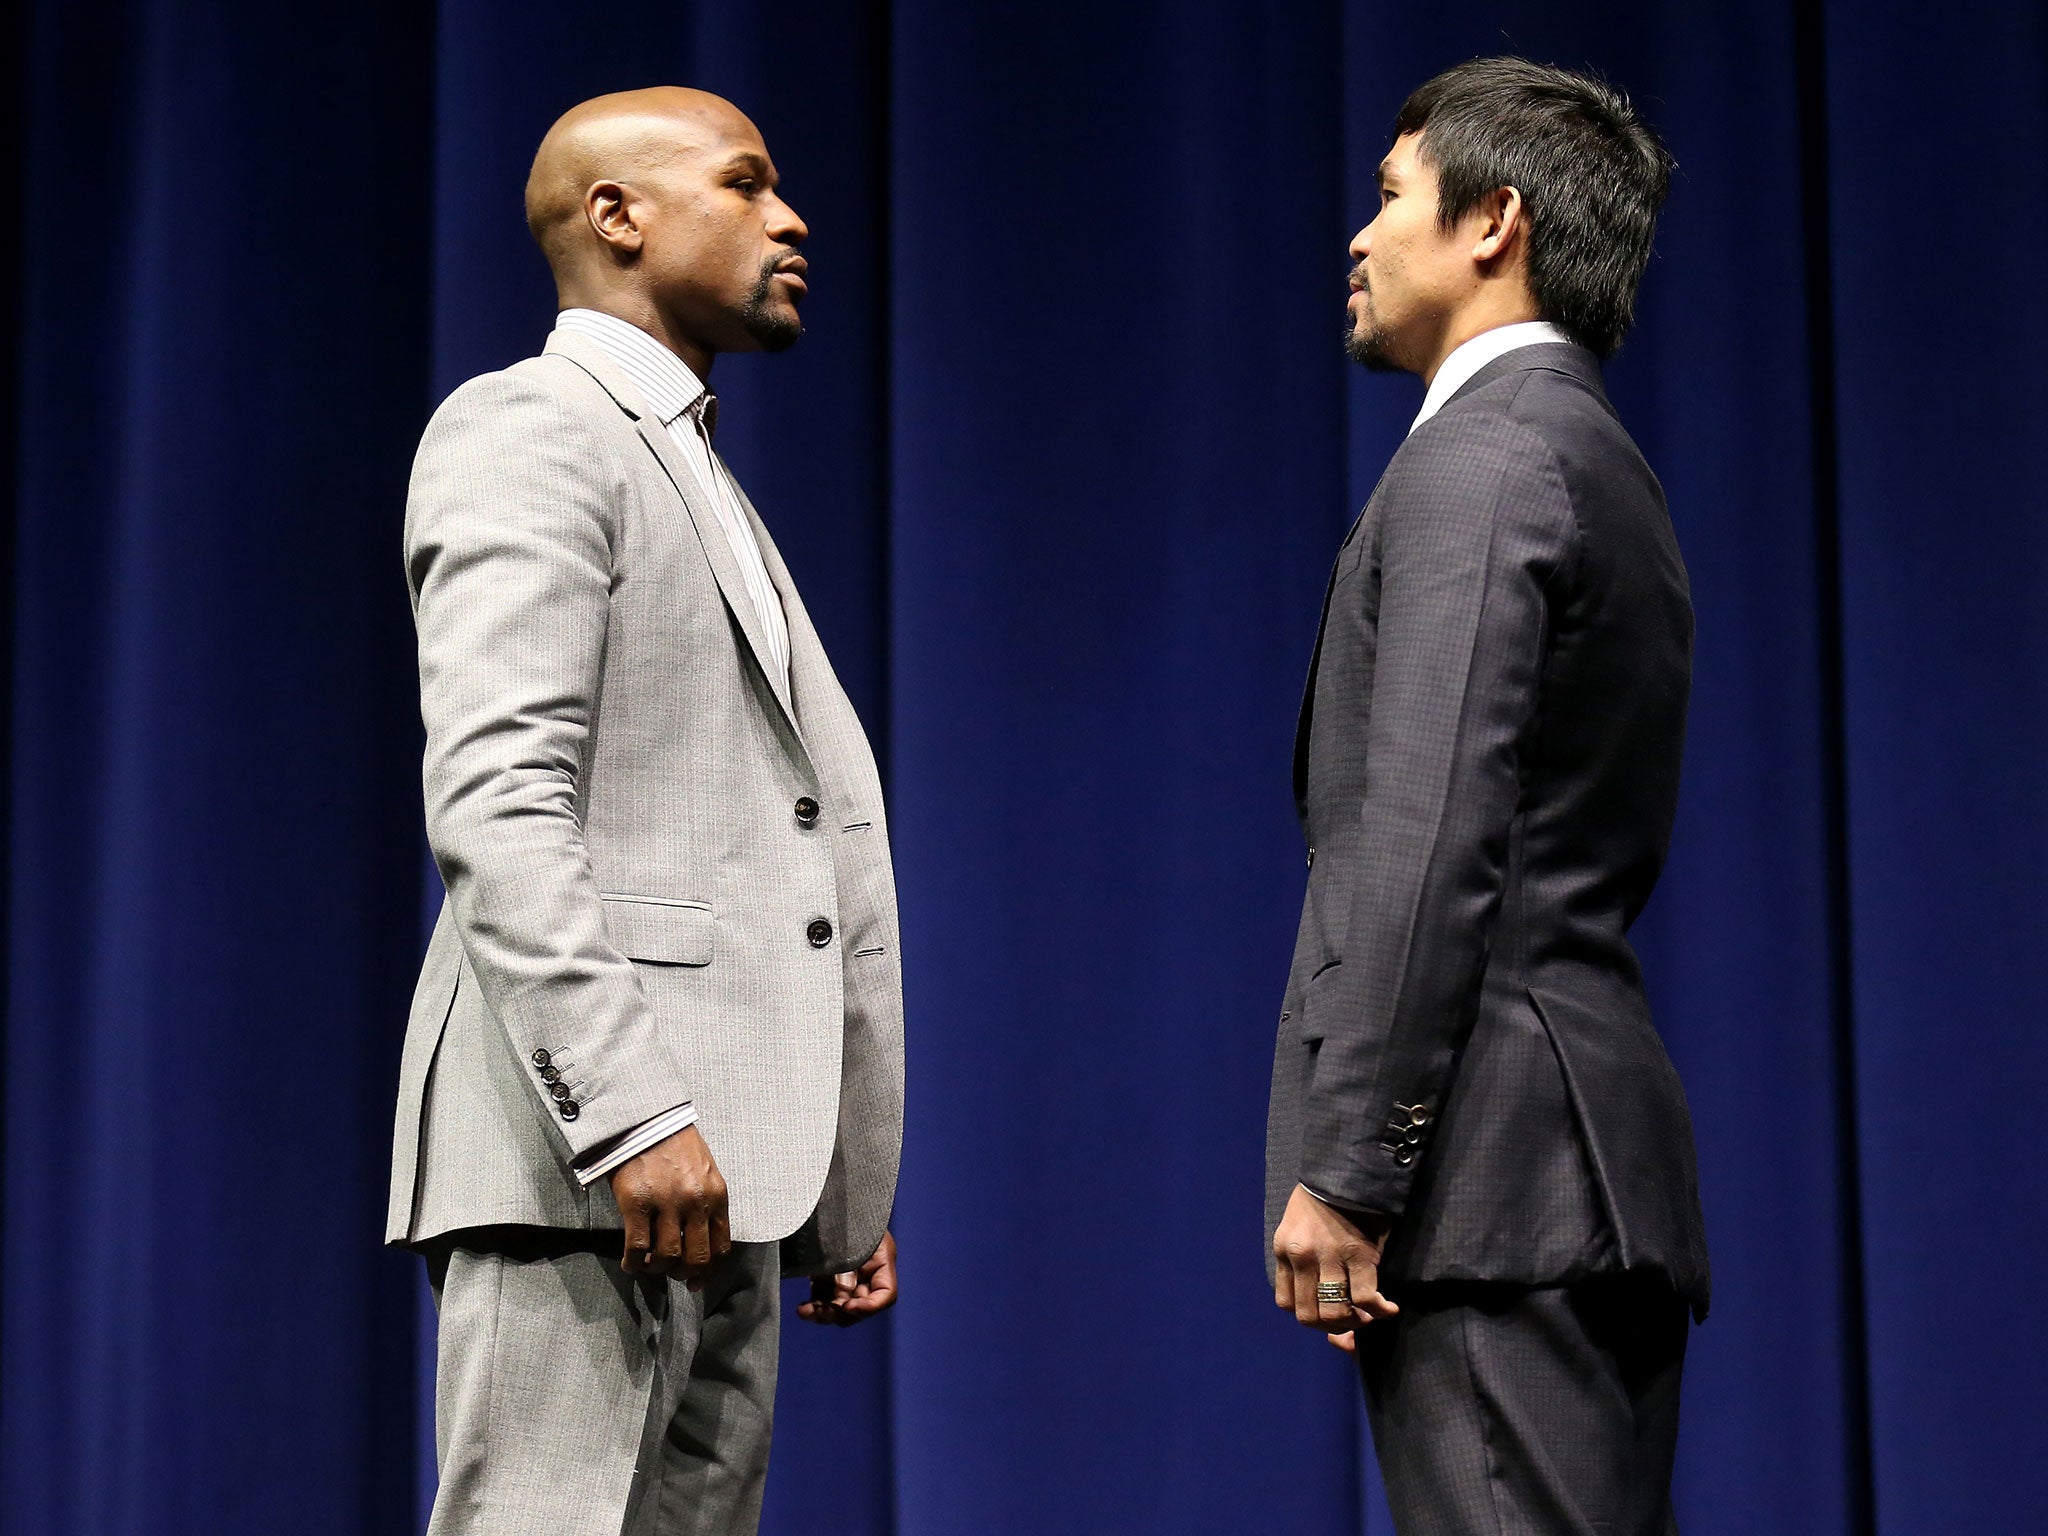 Floyd Mayweather and Manny Pacquiao go head-to-head during their only press conference before their upcoming fight last month